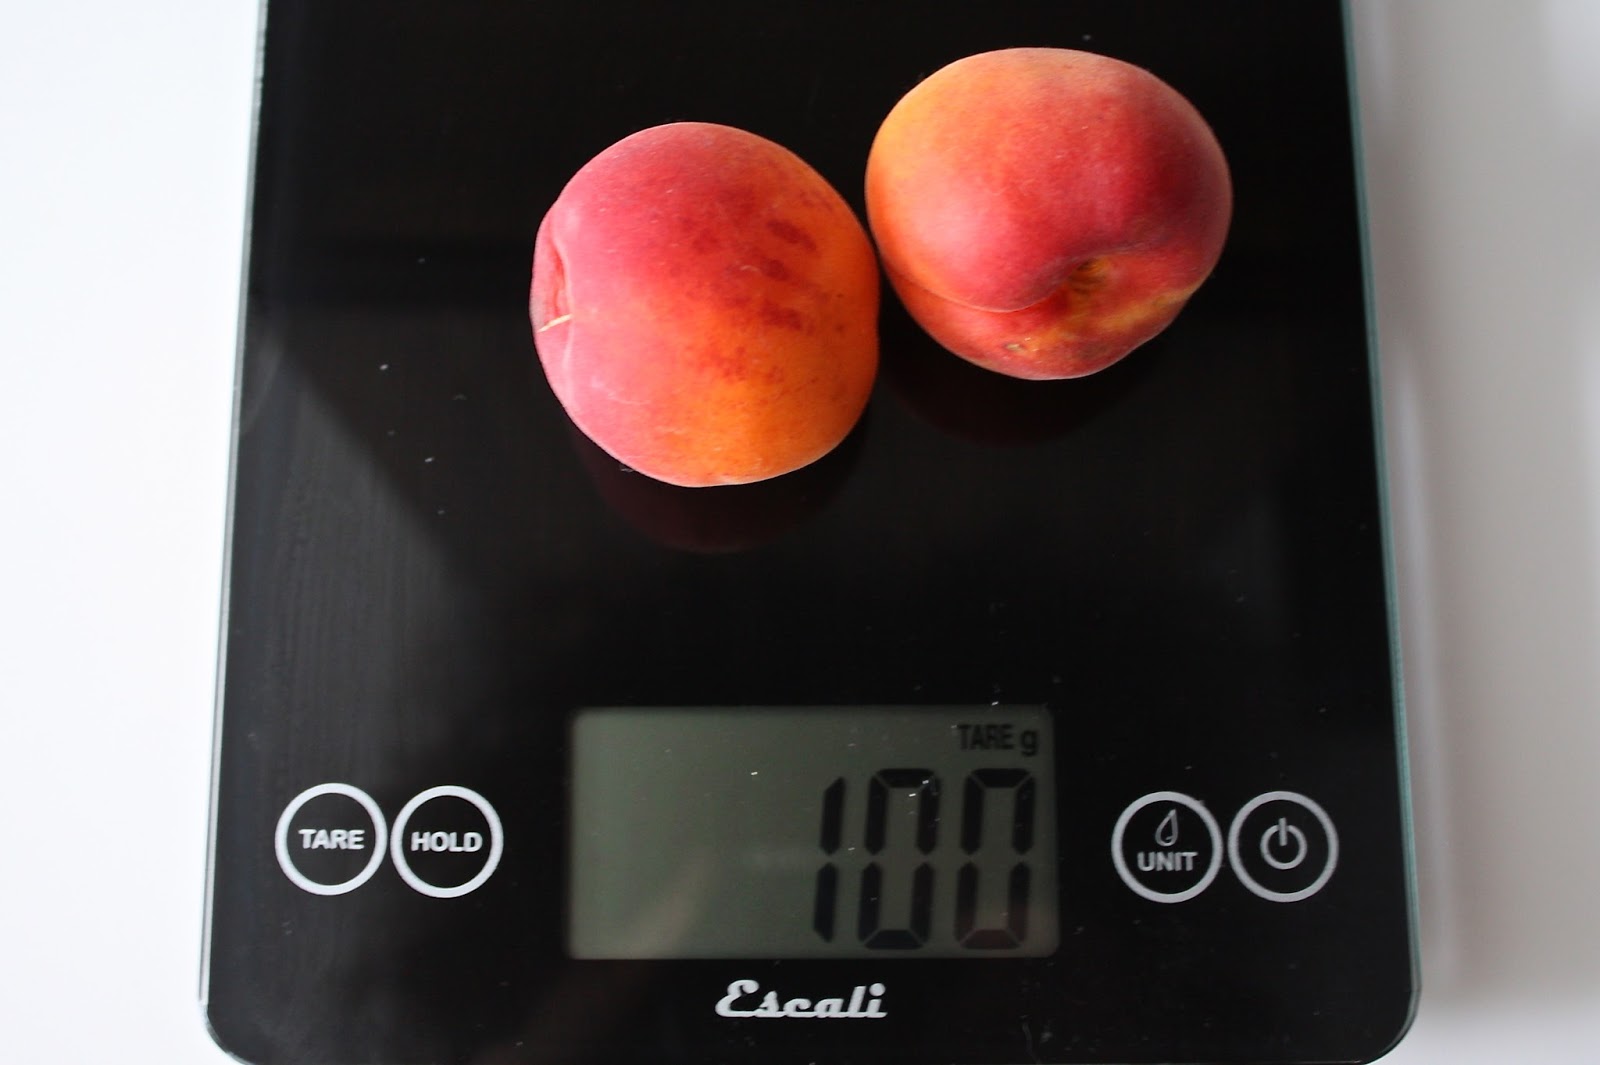 100 grams of apricots measured on a digital scale